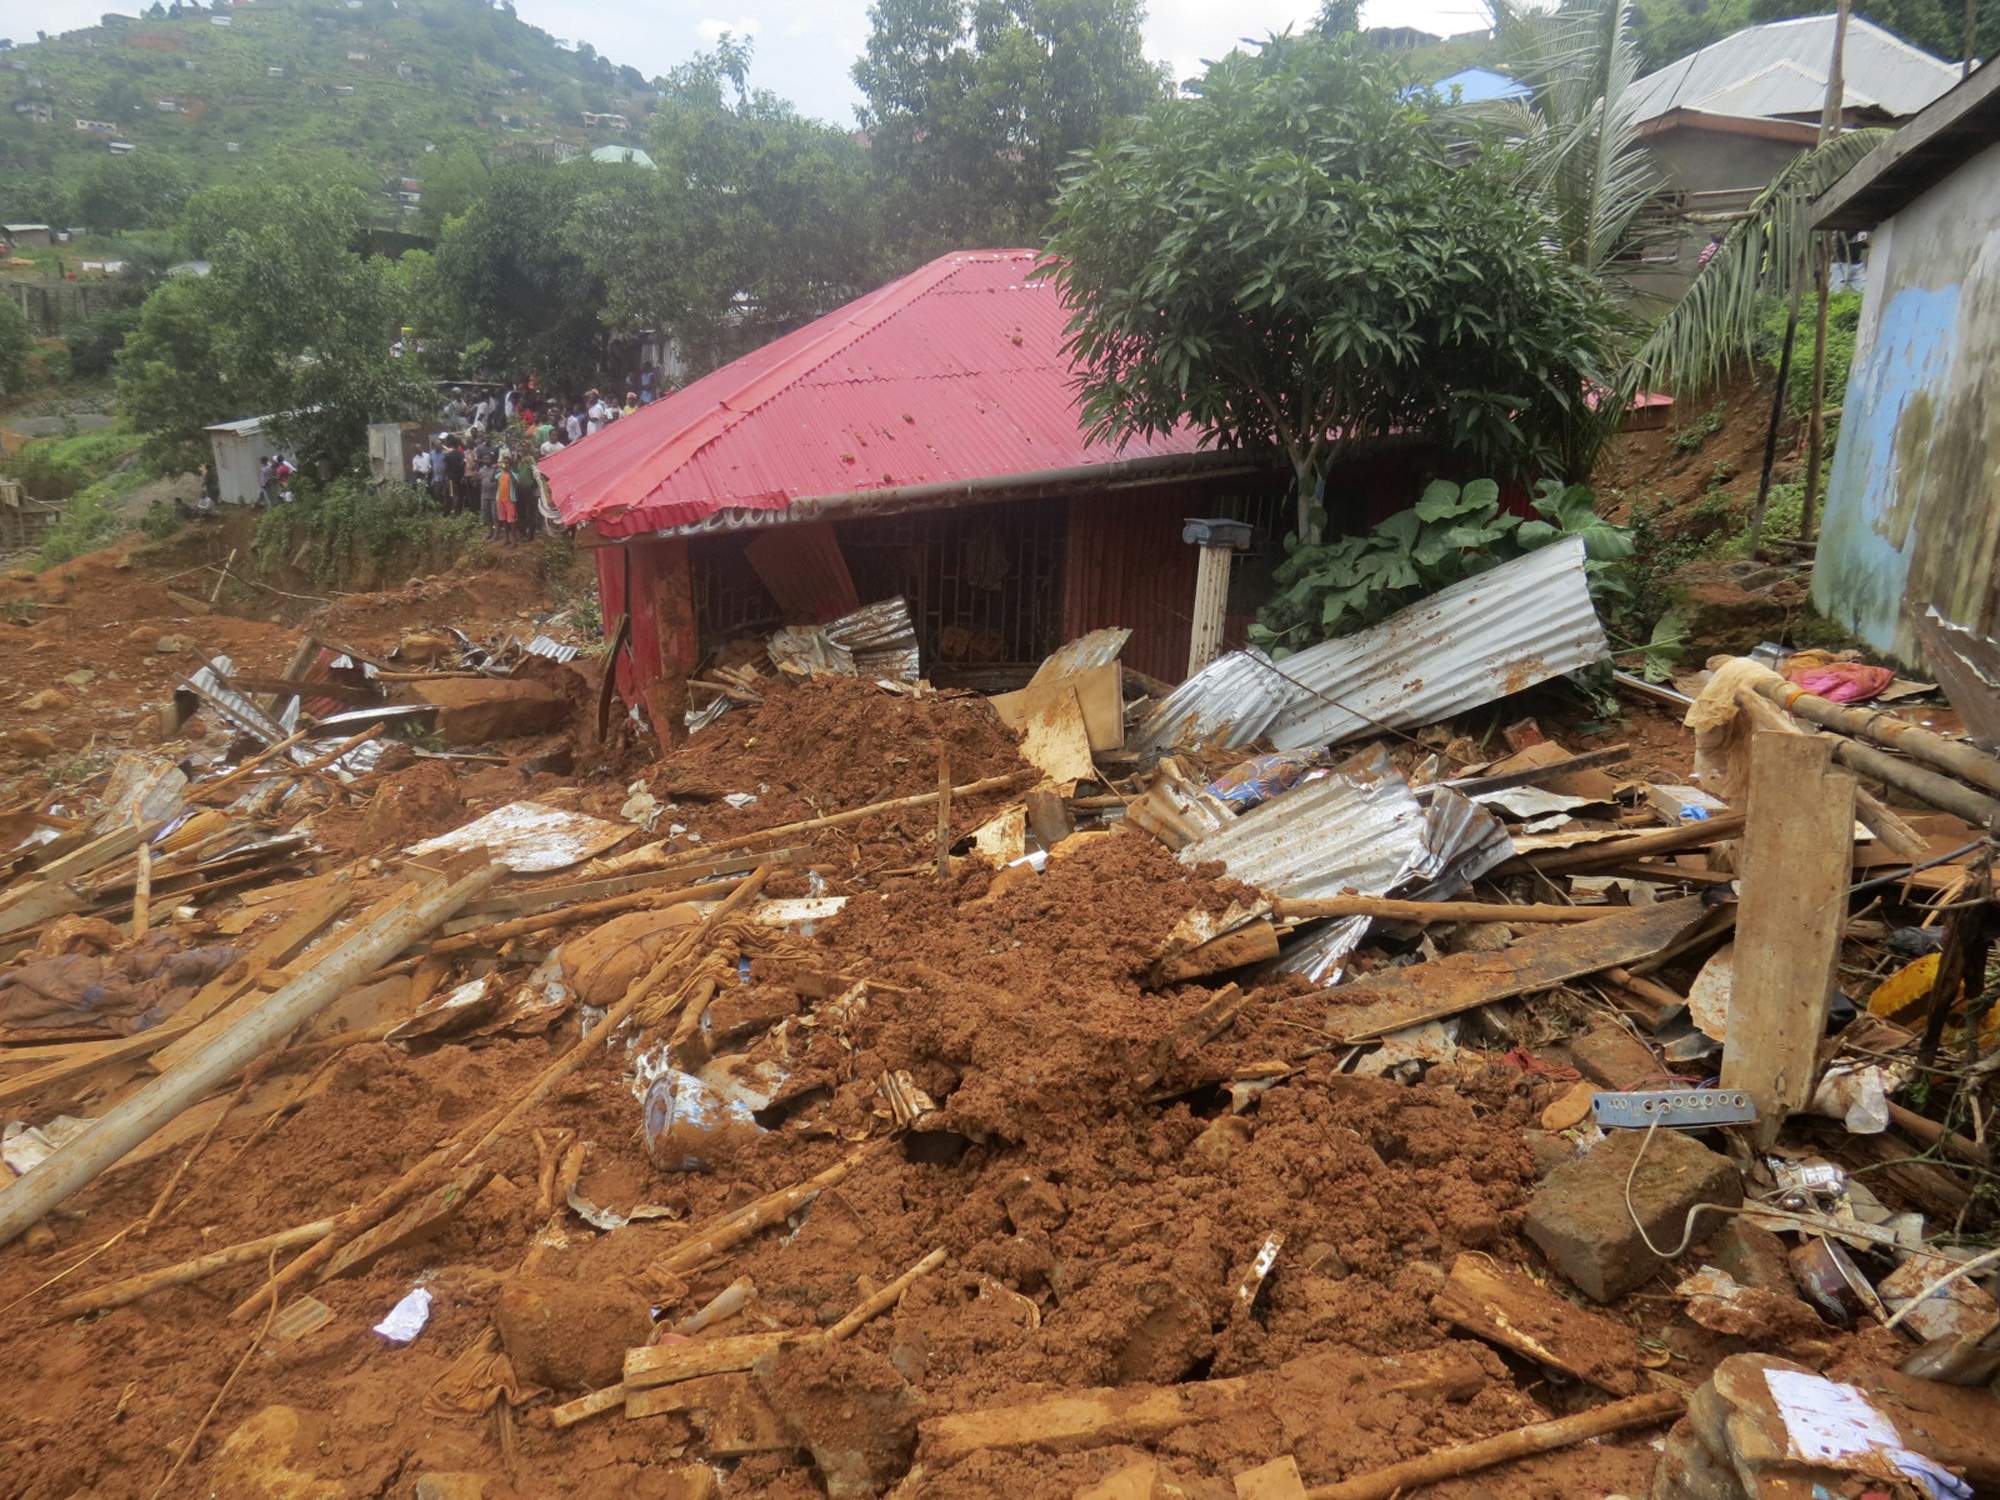 UK Gives Cash Directly to Sierra Leonean Mudslide Victims